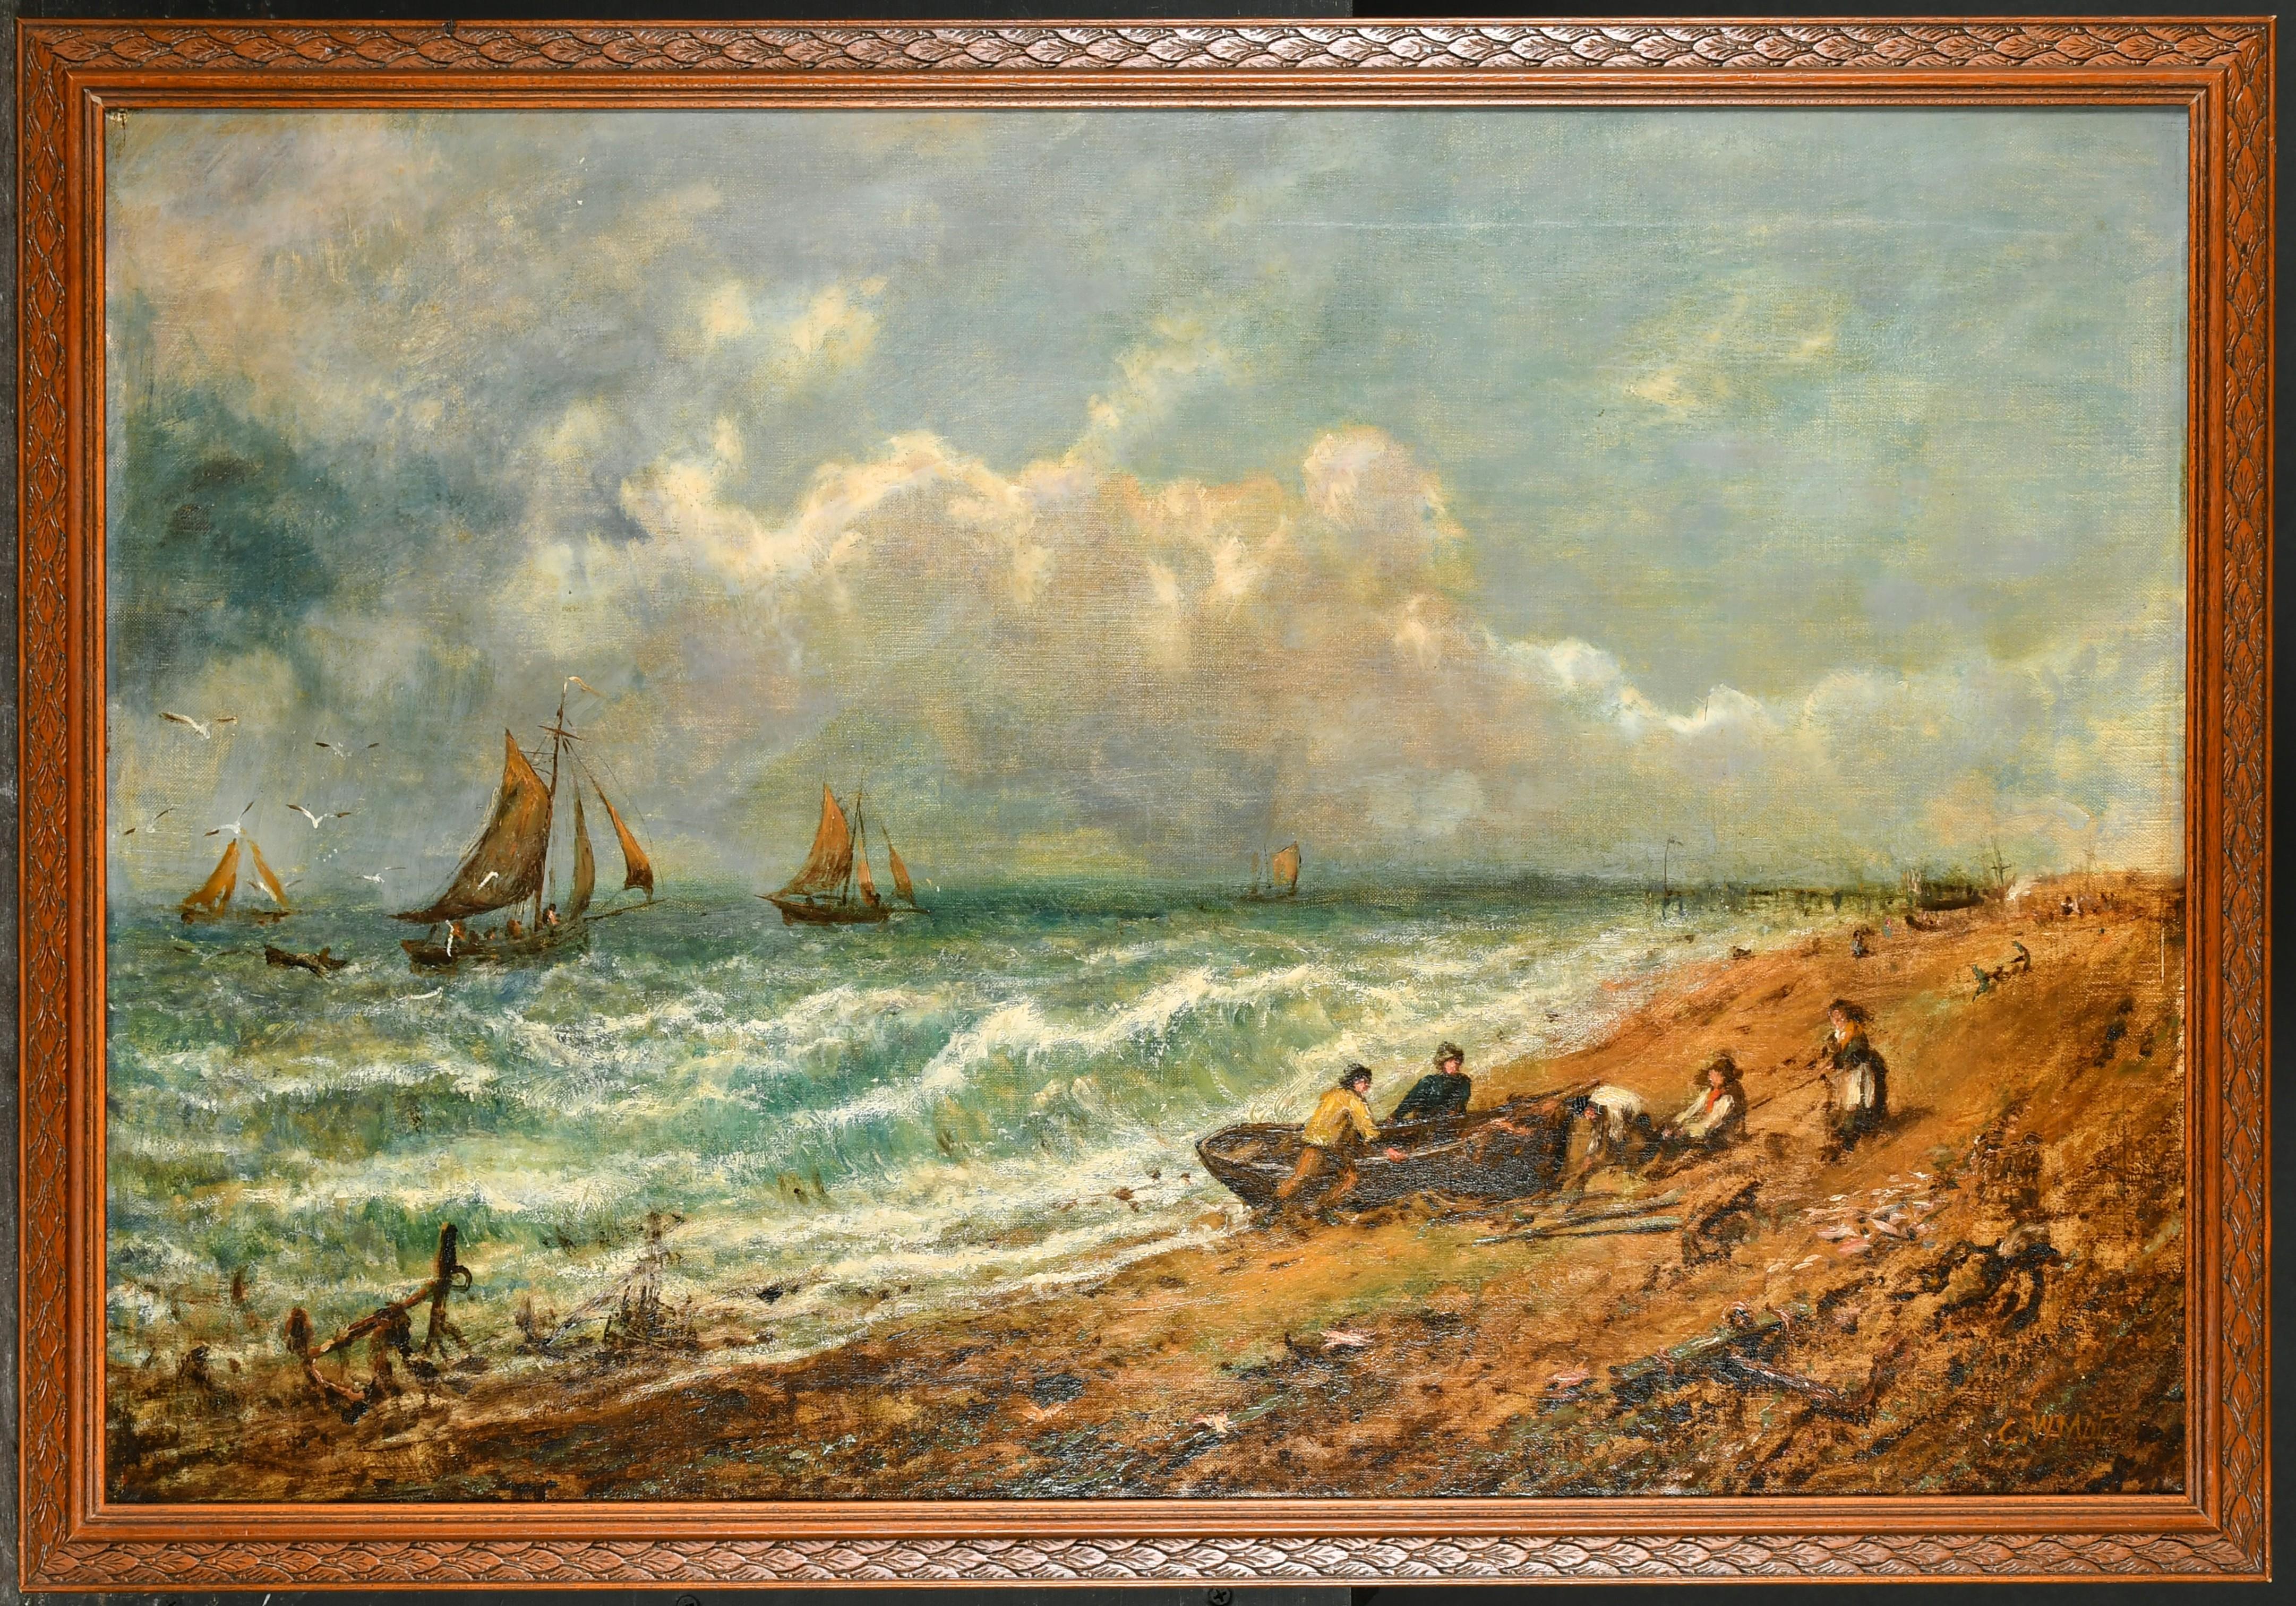 A Beach Scene With Figures
George William Mote (1832-1909) British, signed
oil painting on canvas, framed
framed: 25 x 28 inches
canvas: 22 x 27 inches 
provenance: private collection, England
condition: very good and sound condition